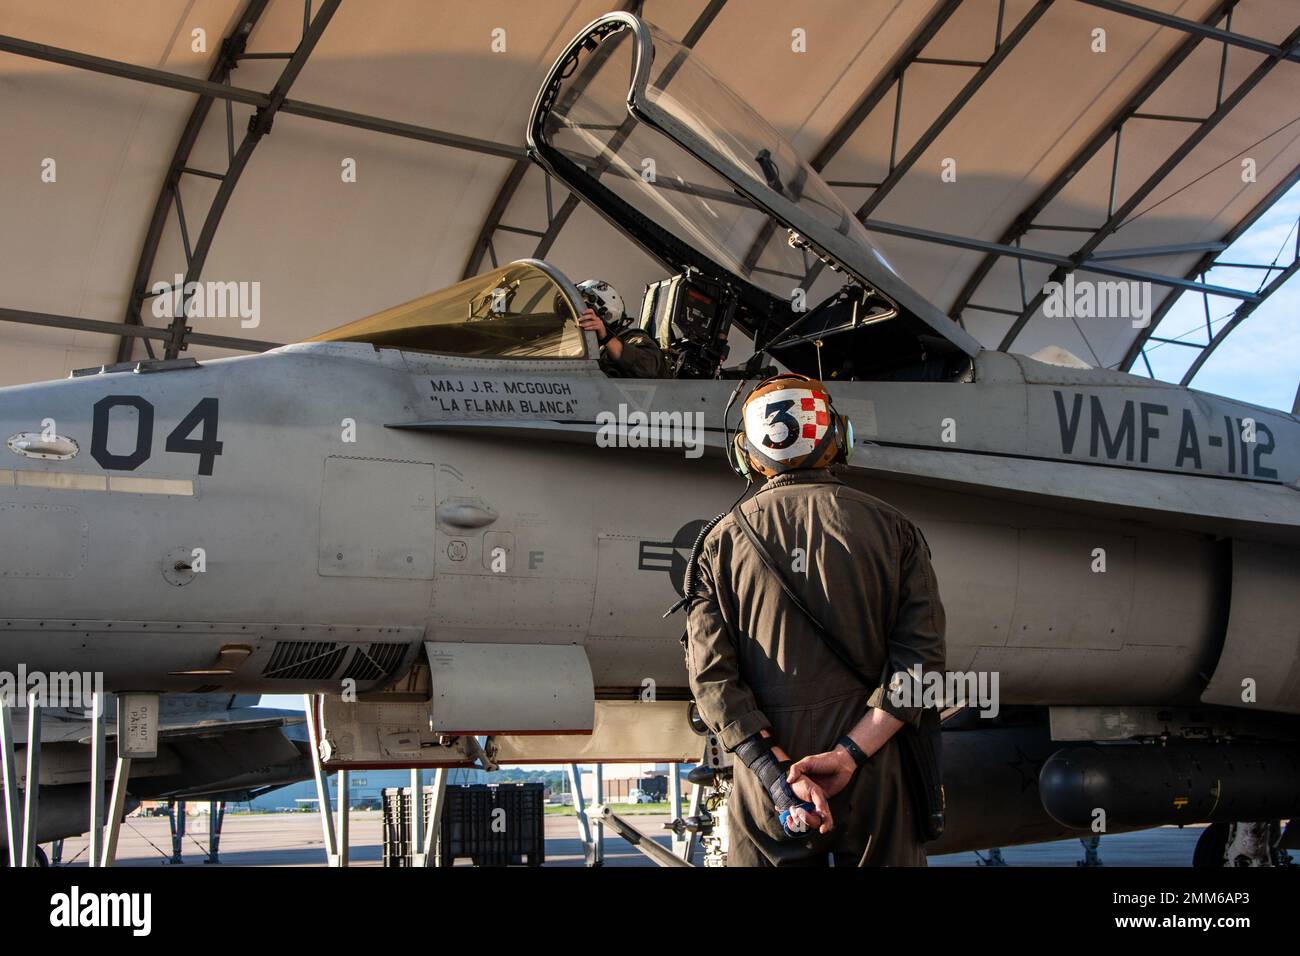 Marines attached to Marine Fighter Attack Squadron (VMFA) 112, Marine Aircraft Group 41, 4th Marine Aircraft Wing, conduct pre-flight checks on an F/A-18C Hornet at Naval Air Station Joint Reserve Base Fort Worth, Texas, Sept. 15, 2022. VMFA-112 is participating in a joint long-range strike exercise with Marine Aerial Refueler Transport Squadron (VMGR) 234, VMFA-225, Marine Fighter Training Squadron (VMFT) 401 and U.S. Air Force 513th Operations Support Squadron. This large force exercise demonstrates MAG-41's ability to project long-range strike capability and integrate with the Marine Corps' Stock Photo